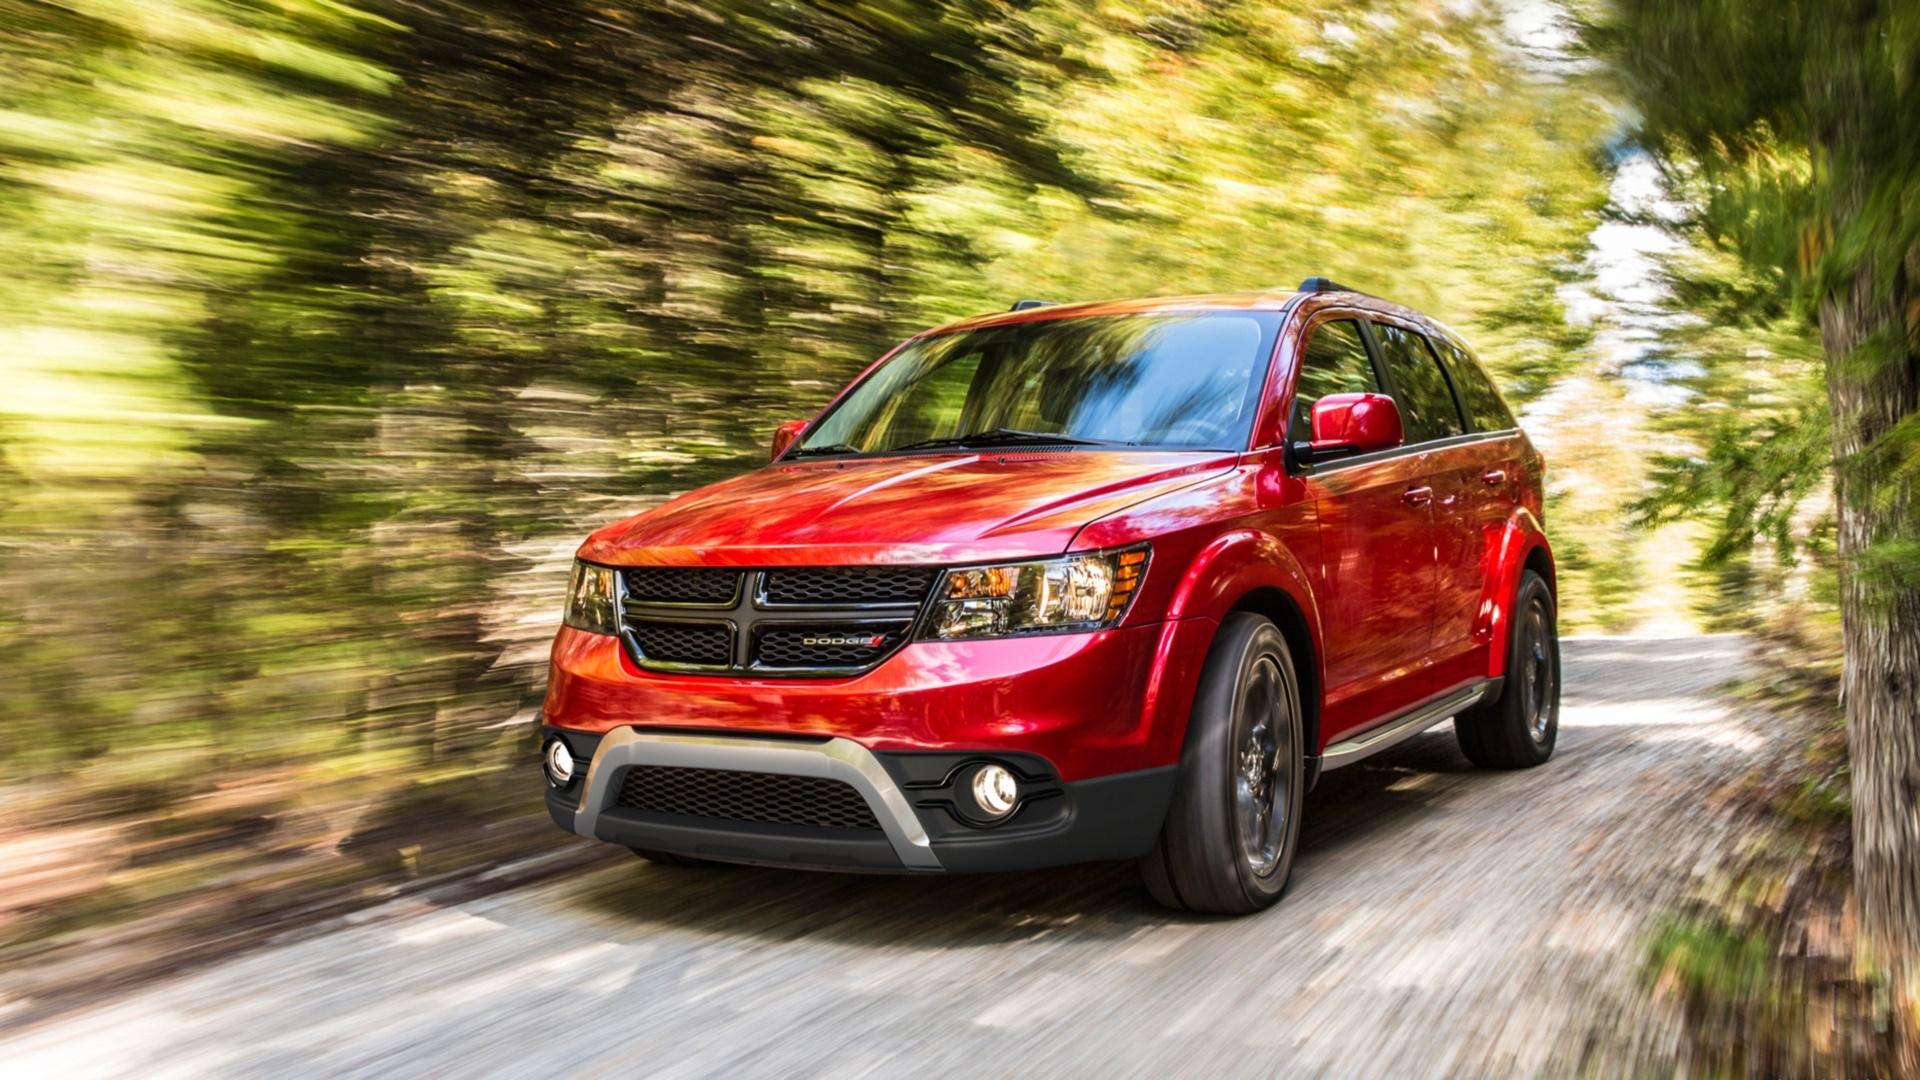 Dodge Journey wallpapers HD quality